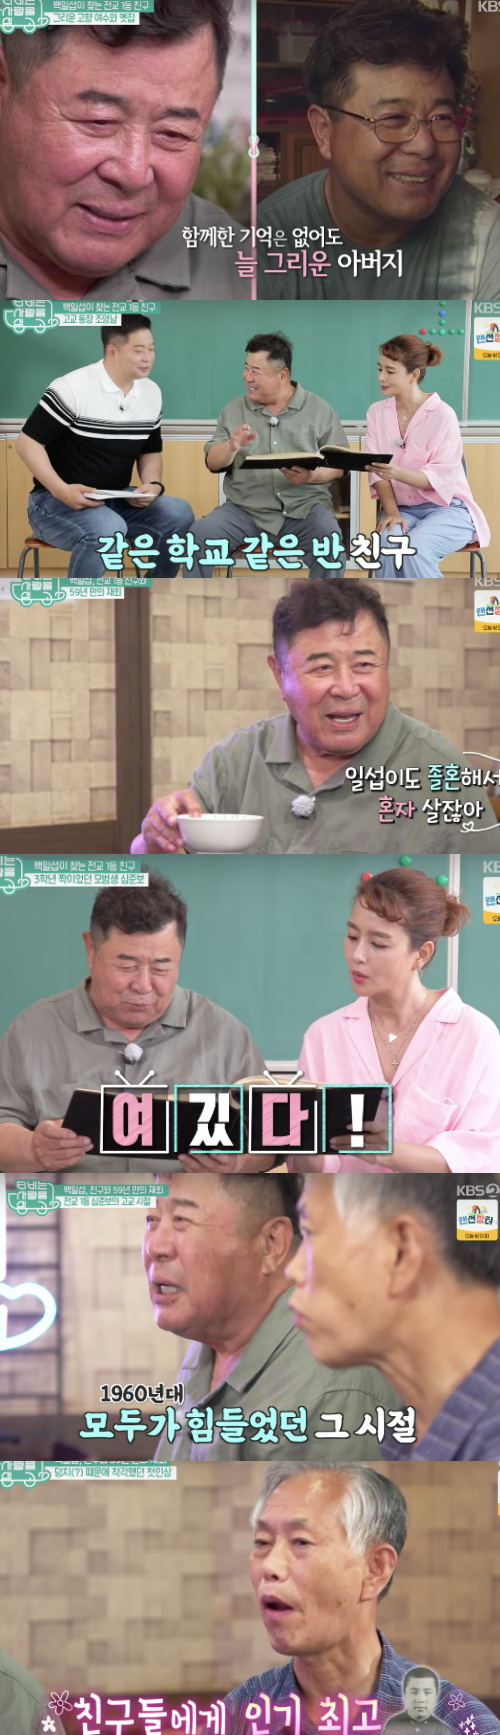 With TV Loading Love announcing End, the last guest, Baek Il-seob, met Friend in 59 years.Above all, Friend shared the current situation by mentioning the paternity of Baek Il-seob.The entertainment KBS2TV entertainment TV with Love was Ended on the 30th.I looked back at the school days of Baek Il-seob from Yeosu, South Jeolla Province.My mother divorced my father in the third grade of elementary school and came up to Seoul, said Baek Il-seob, who said she settled down as Seoul after her parents divorce.He said, I originally went to Fisheries High School to become Madoros, and I was a captain to catch meat.At that time, in Yeosu, Seaoul had to take a coal train and it took more than 13 hours.Baek Il-seob then said, I cried for one to two hours on the train.I wanted to leave my hometown, he said. I had a lot of persecution in my busy father and stepmother, but I was crying to leave my hometown.Asked about the relationship he wanted to find, he said, I wanted to find my best friend, Shim Jun-bo.I had to write my name and do it by releasing my test paper instead of the test paper. He then moved to his alma mater at Baek Il-seob.We have a lot of people who were bullied by the weak people at the time, and when Friend asked me that I was not good at school on the first day of the transfer, I did not know well, so I had to be careful because it was tough, he said.I couldnt turn around when I was just hitting Friend, who warned bad students to be caring, and I couldnt get a lot of numbers, he said, regretting the moment he couldnt help.Baek Il-seob, who said that it had changed since then, said, I saw Friend being hit and I went to the school for the peace of school, saying that I was going to gather from Jeolla province.This was also seen in the life record.Baek Il-seob said in his second year record that he had a sincere and surmise, and in his third year he said, He is faithful, but his personality is urgent and disorderly.Baek Il-seob said, I am still in a hurry and there is no order. He said, Thanks to the Friend, the first class in the school.When asked about his feelings about meeting a high school student, Baek Il-seob, more than 60 years ago, he said, I have a lot of thoughts like this, I was hungry for 18 years old and I was full of loneliness.I want to summon and miss memories for a long time, said Baek Il-seob, who was expecting to meet Friend Shim Jun-bo.Then, Baek Il-seob called the Friend name in a caring manner.The two people who met in 59 years were reunited, and Baek Il-seob exchanged makgeolli with Friend, and Friend, who had died with his wife 10 years ago, told Baek Il-seob that he knew the current situation by saying, I was so sleepy and lived Alone.I thought I was a bad student at first, because of my extraordinary body and intense impression, he recalled, recalling his past school days. I thought I was in a different place when I transferred to the school, but I did not think it was a good friend for friends.TV is with love capture